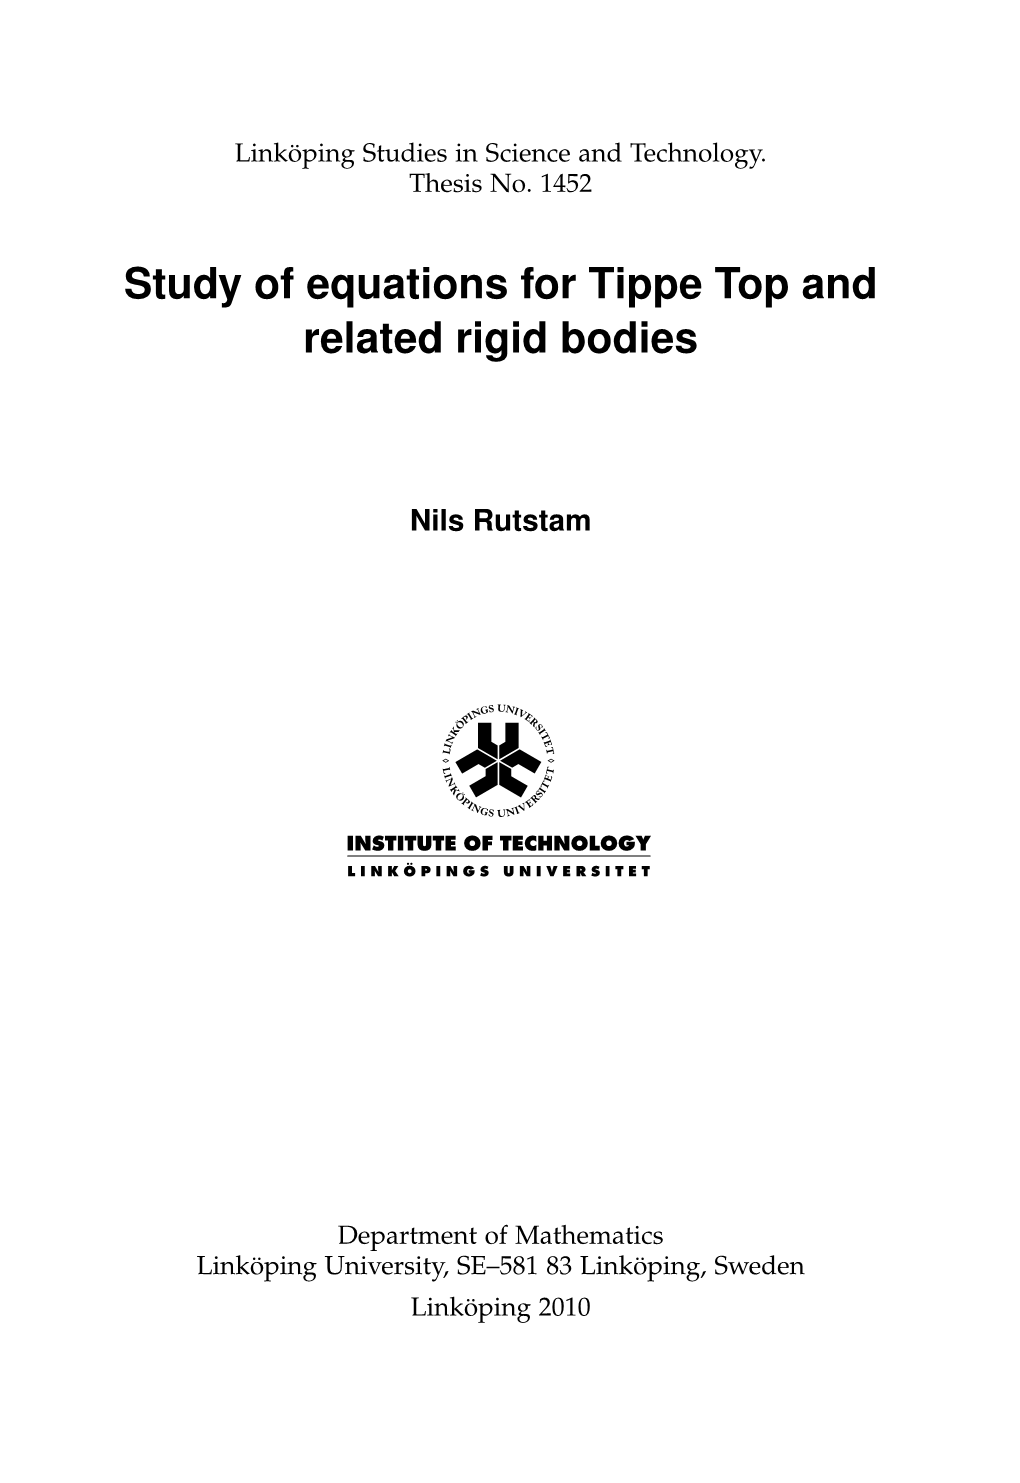 Study of Equations for Tippe Top and Related Rigid Bodies